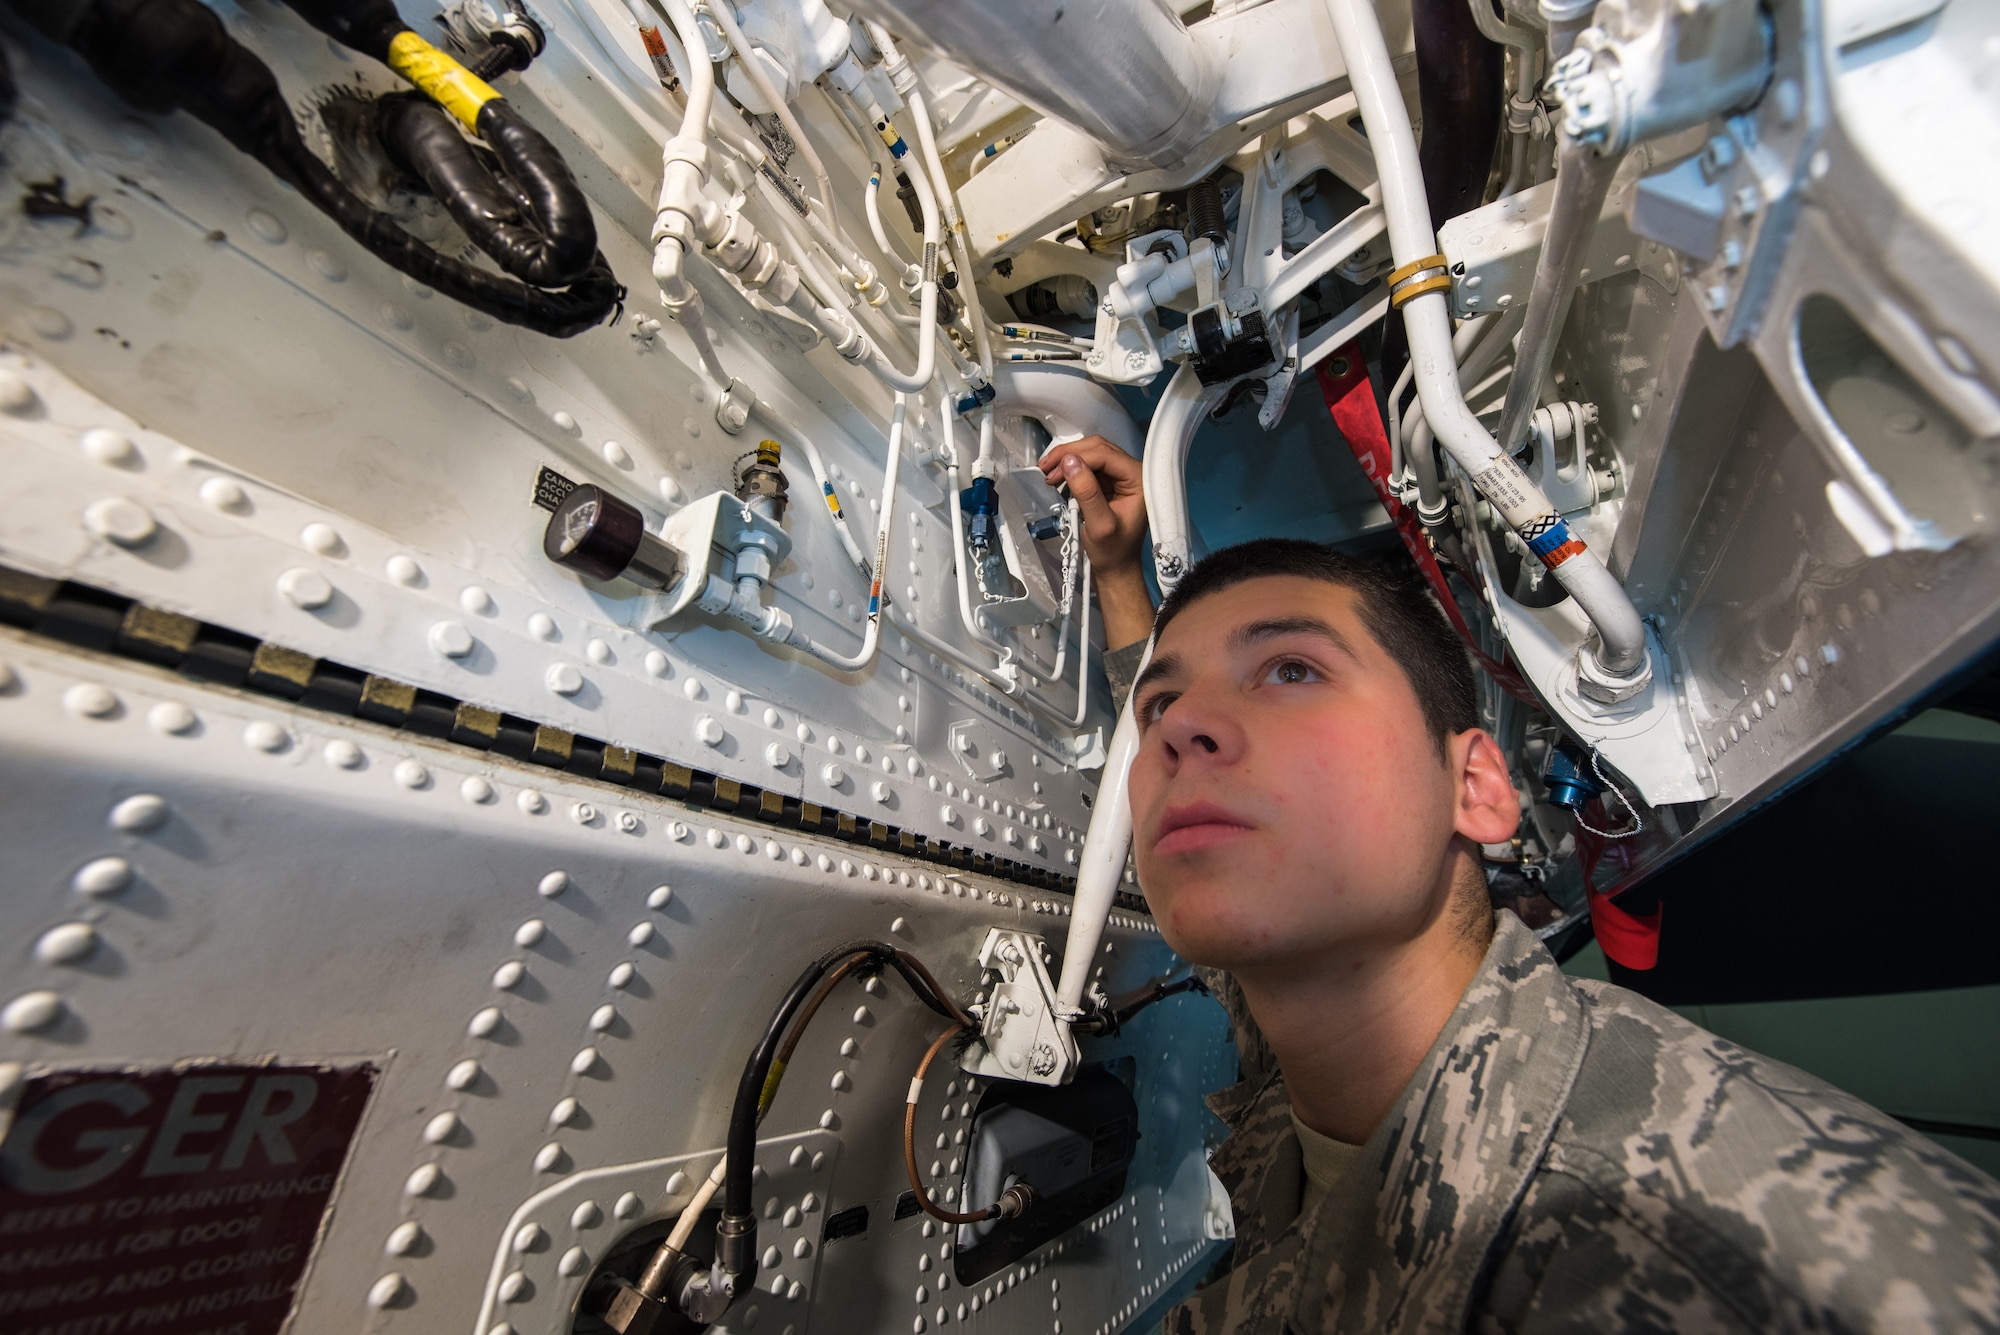 Airman 1st Class Saul Vasquez, 366th Equipment Maintenance Squadron phase inspection team member, poses for a photo inside the front wheel well of an F-15E Strike Eagle at Mountain Home Air Force Base, Idaho, June 25, 2015. The opening, barely larger than a foot wide, is laden with pipes and wires requiring absolute precision to maneuver. A simple misstep caused Vasquez to tear his radial artery on one of the many obstacles inside the belly of the aircraft. (U.S. Air Force photo by Airman 1st Class Connor J. Marth)